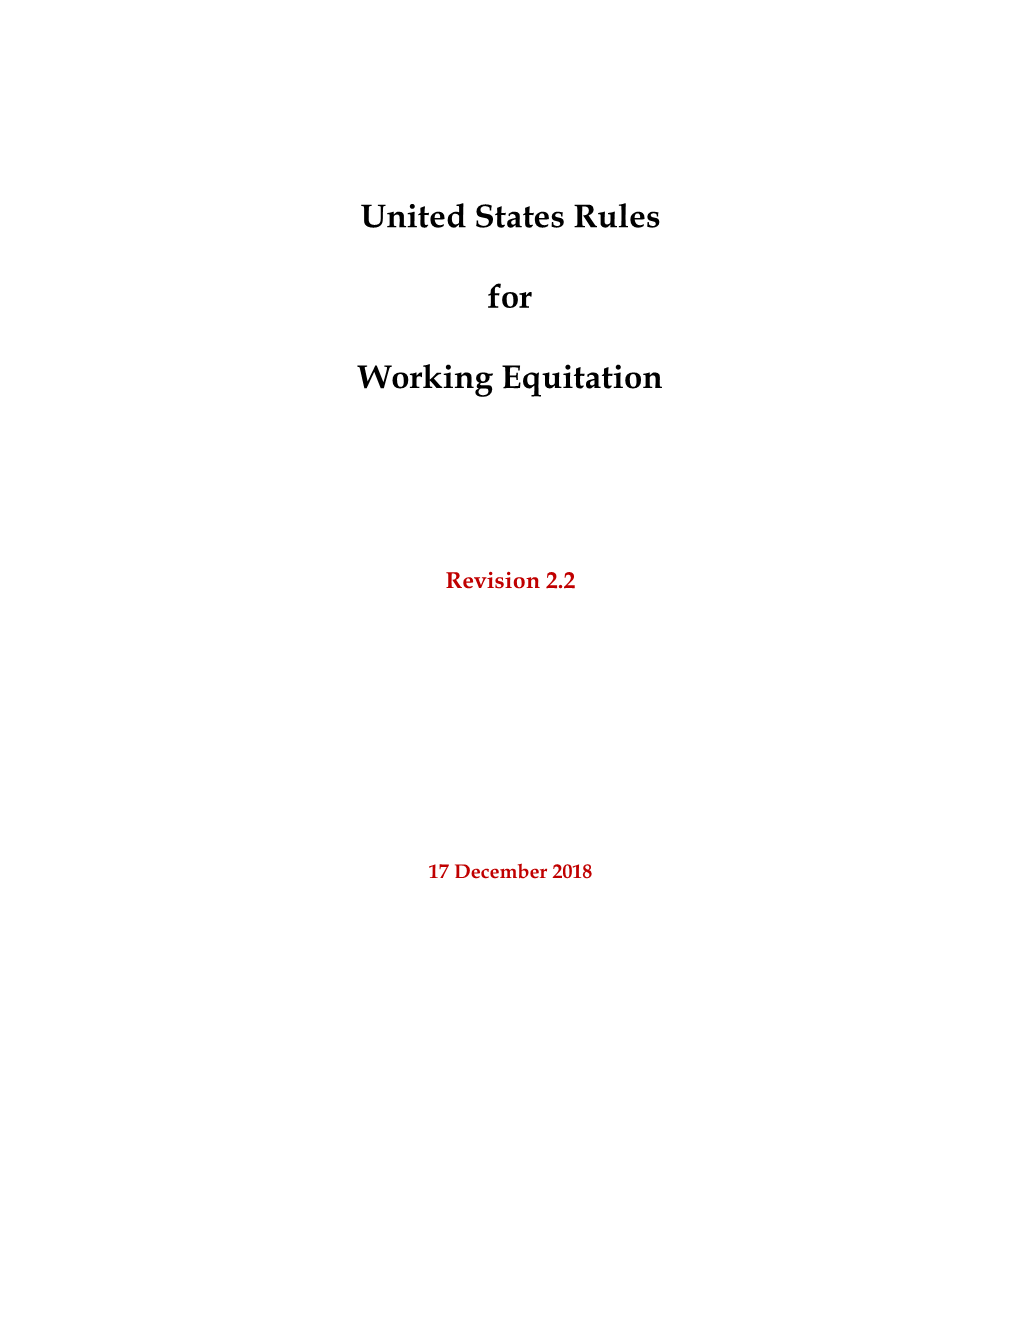 United States Rules for Working Equitation